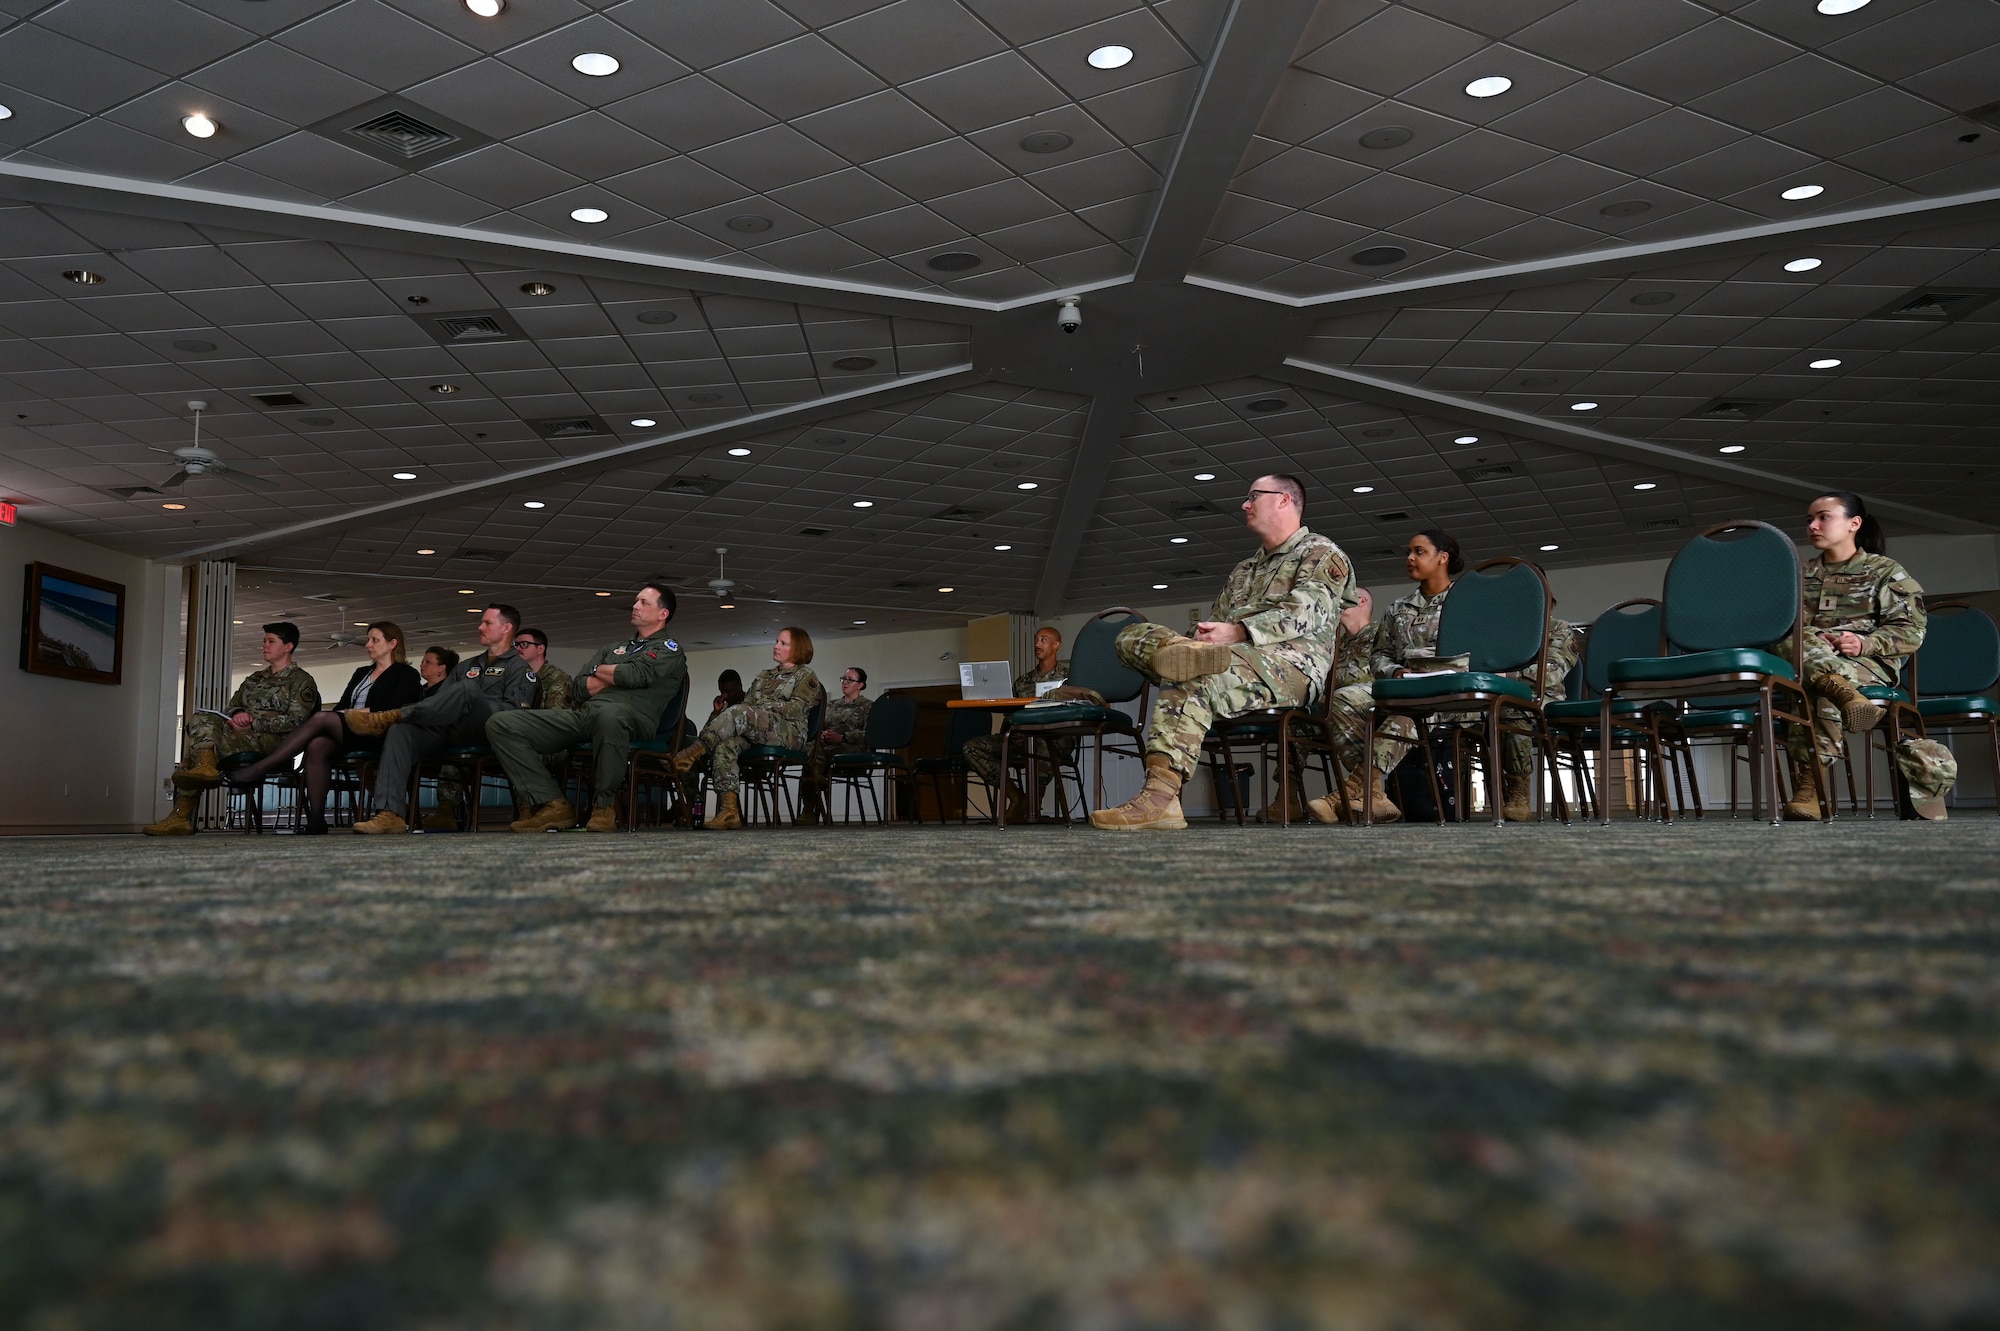 Airmen from the 350th Spectrum Warfare Wing attend the first 350th SWW Women’s History Month Symposium at Eglin Air Force Base, Fla., March 27, 2023. The symposium included topics such as history of women in the Armed Forces, barriers to service, promotion and work life balance. (U.S. Air Force photo by Staff Sgt. Ericka A. Woolever)